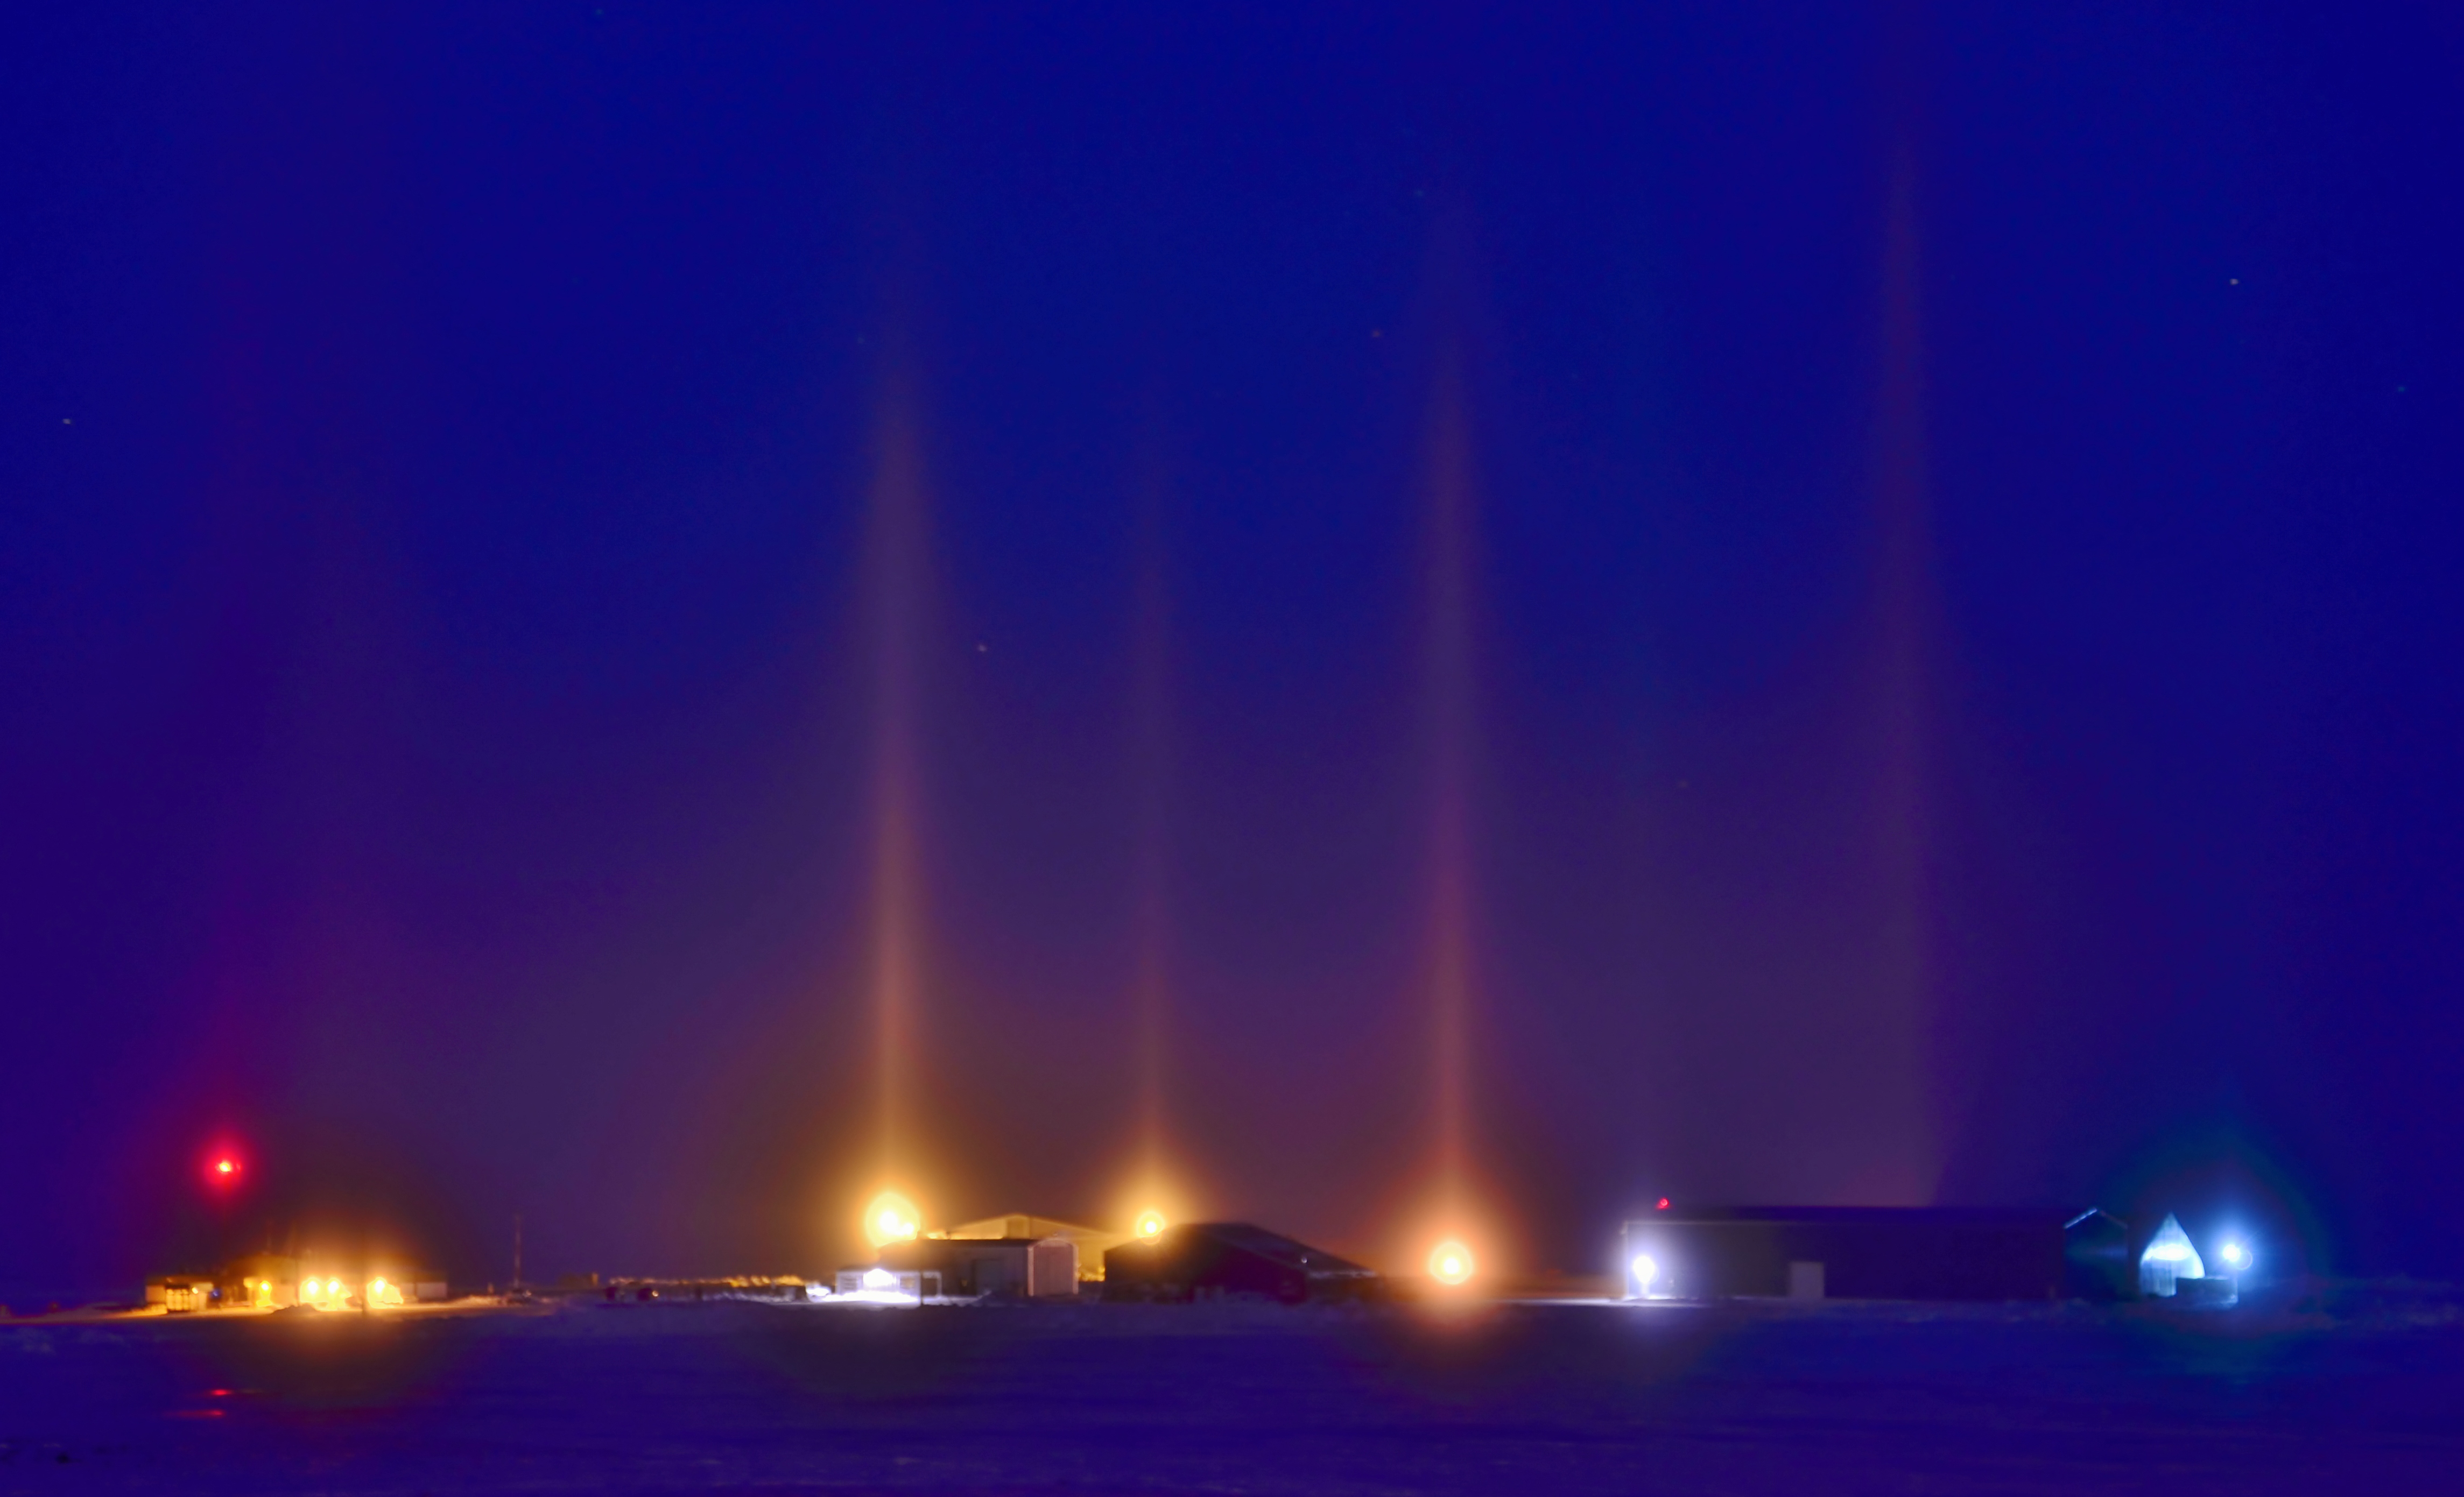 &lt;strong&gt;Figure 1.&lt;/strong&gt; Light pillars—including these examples over Cambridge Bay in Nunavut, Canada—form when light shines through atmospheric ice crystals. The crystals align as they fall through turbulent air, which allows for coherent light scattering. Figure courtesy of &lt;a href=&quot;https://www.flickr.com/photos/37967119@N08/17239657746/&quot; rel=&quot;noopener noreferrer&quot; target=&quot;_blank&quot;&gt;Eric Van Lochem and Flickr&lt;/a&gt; under the &lt;a href=&quot;https://creativecommons.org/licenses/by-sa/2.0/&quot; rel=&quot;noopener noreferrer&quot; target=&quot;_blank&quot;&gt;Attribution-ShareAlike (CC BY-SA 2.0) Generic license&lt;/a&gt;.